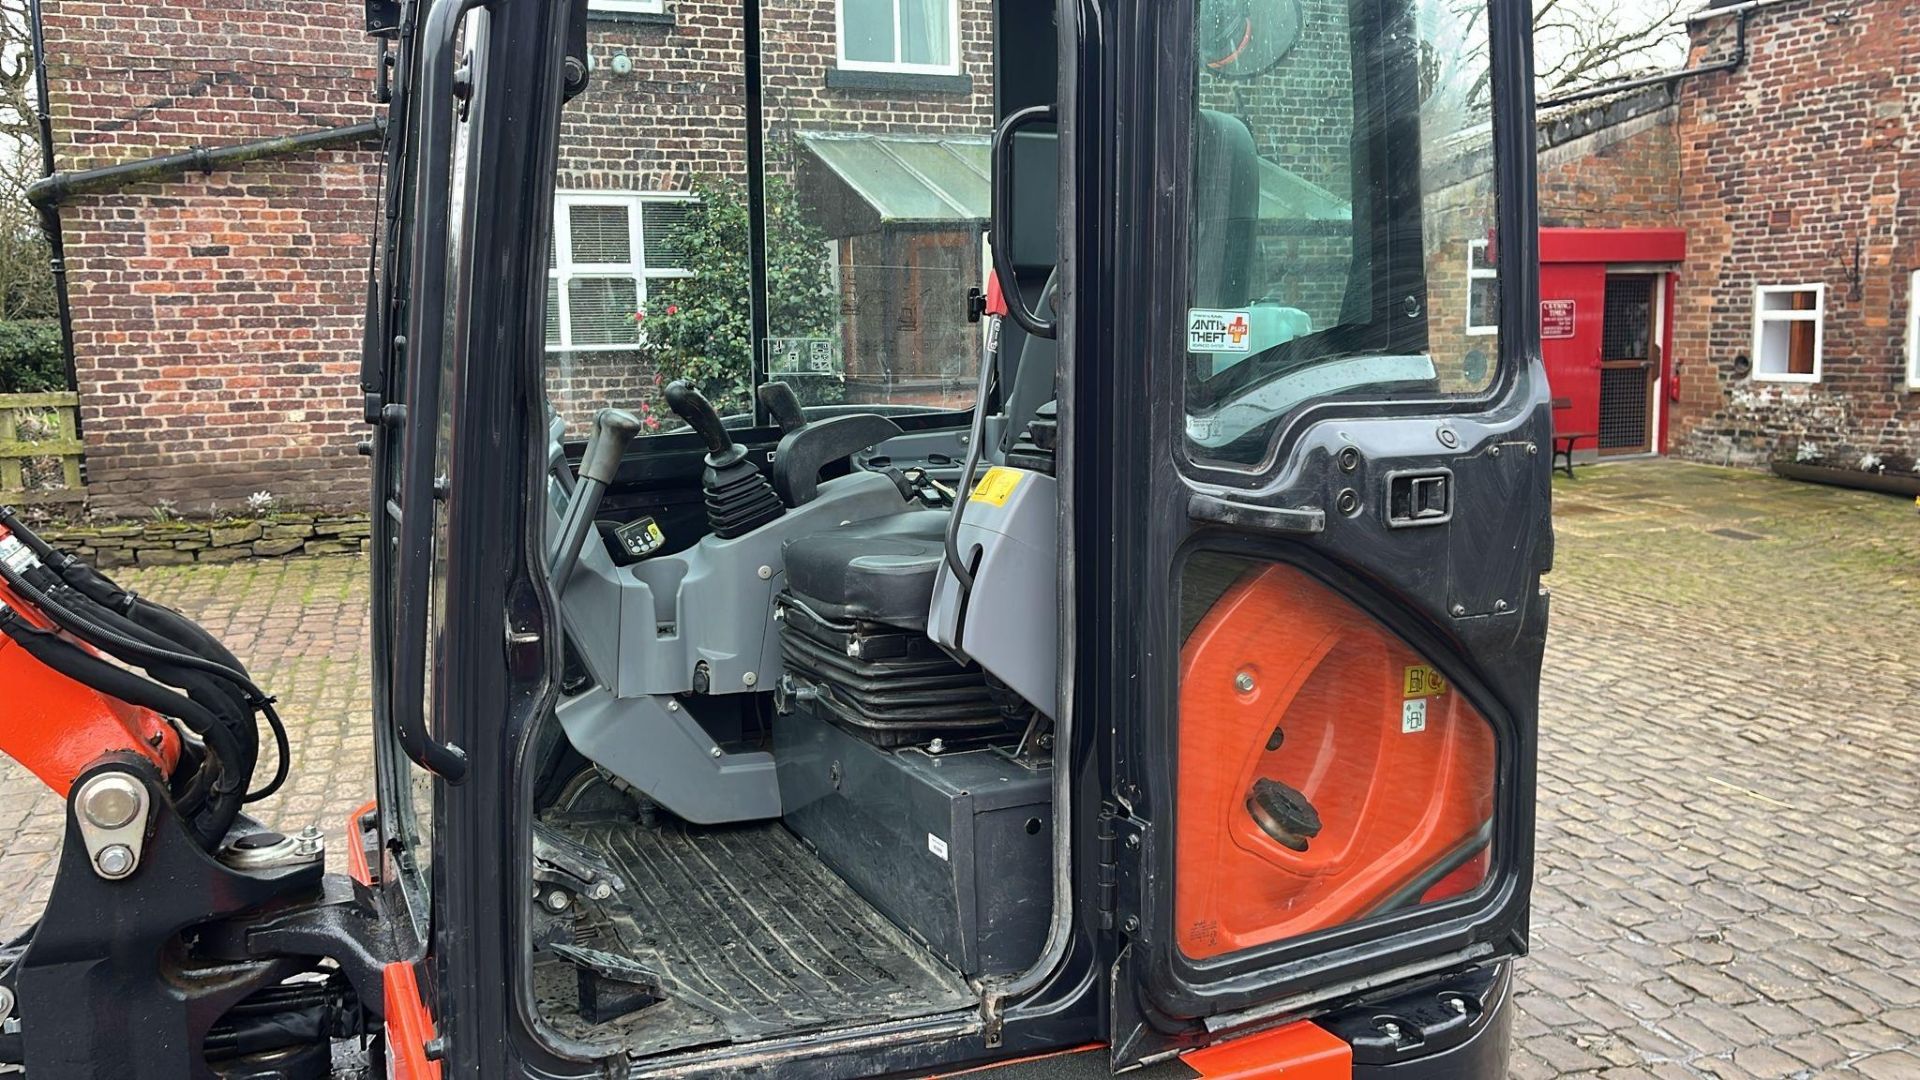 2019 KUBOTA U48-4 COMPACT EXCAVATOR 552 HOURS WITH HYDRAULIC QUICK HITCH TO BE SOLD WITH 4 BUCKETS - Image 14 of 24